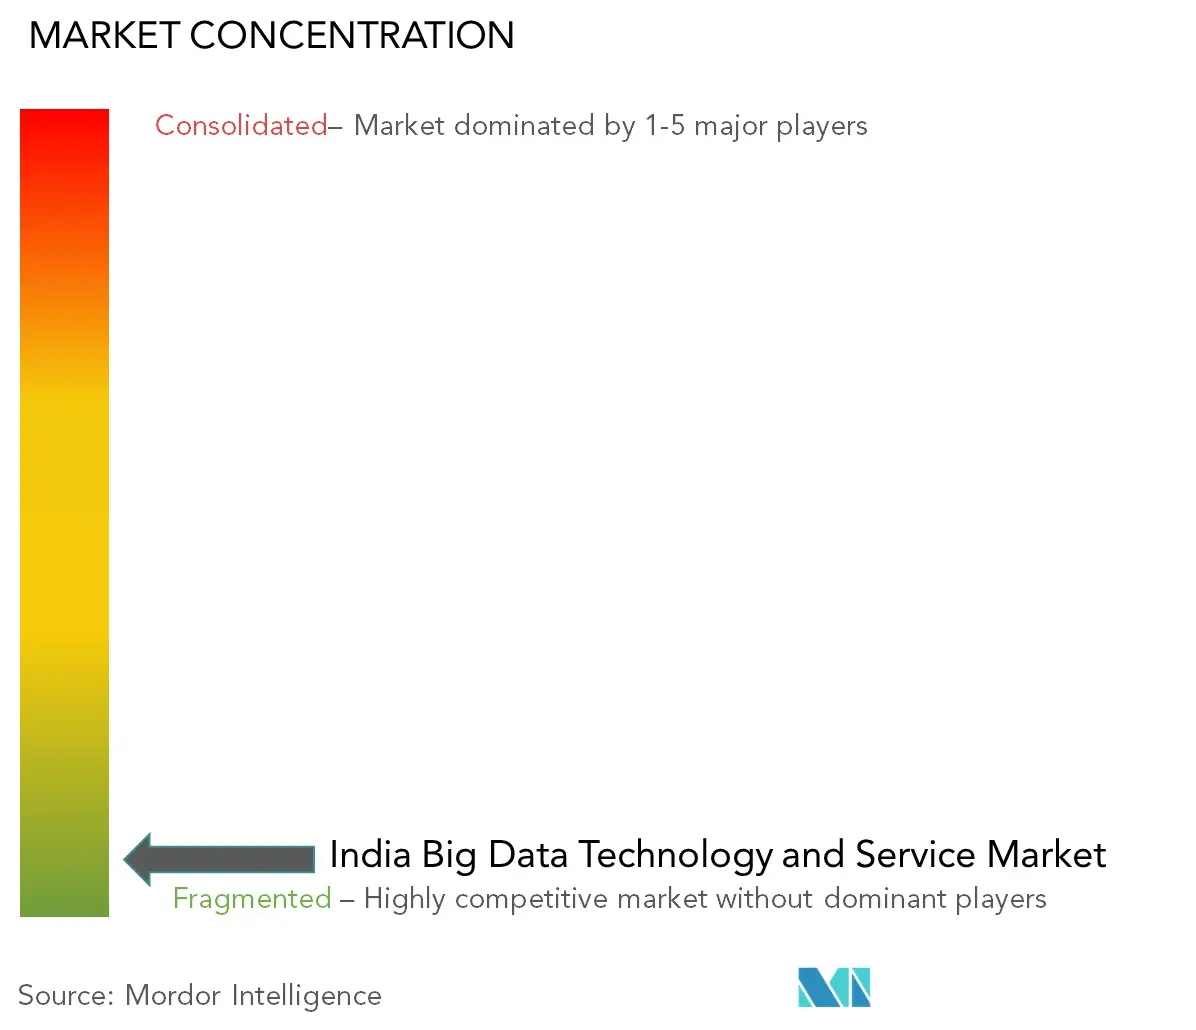 India Big Data Technology & Service Market Concentration